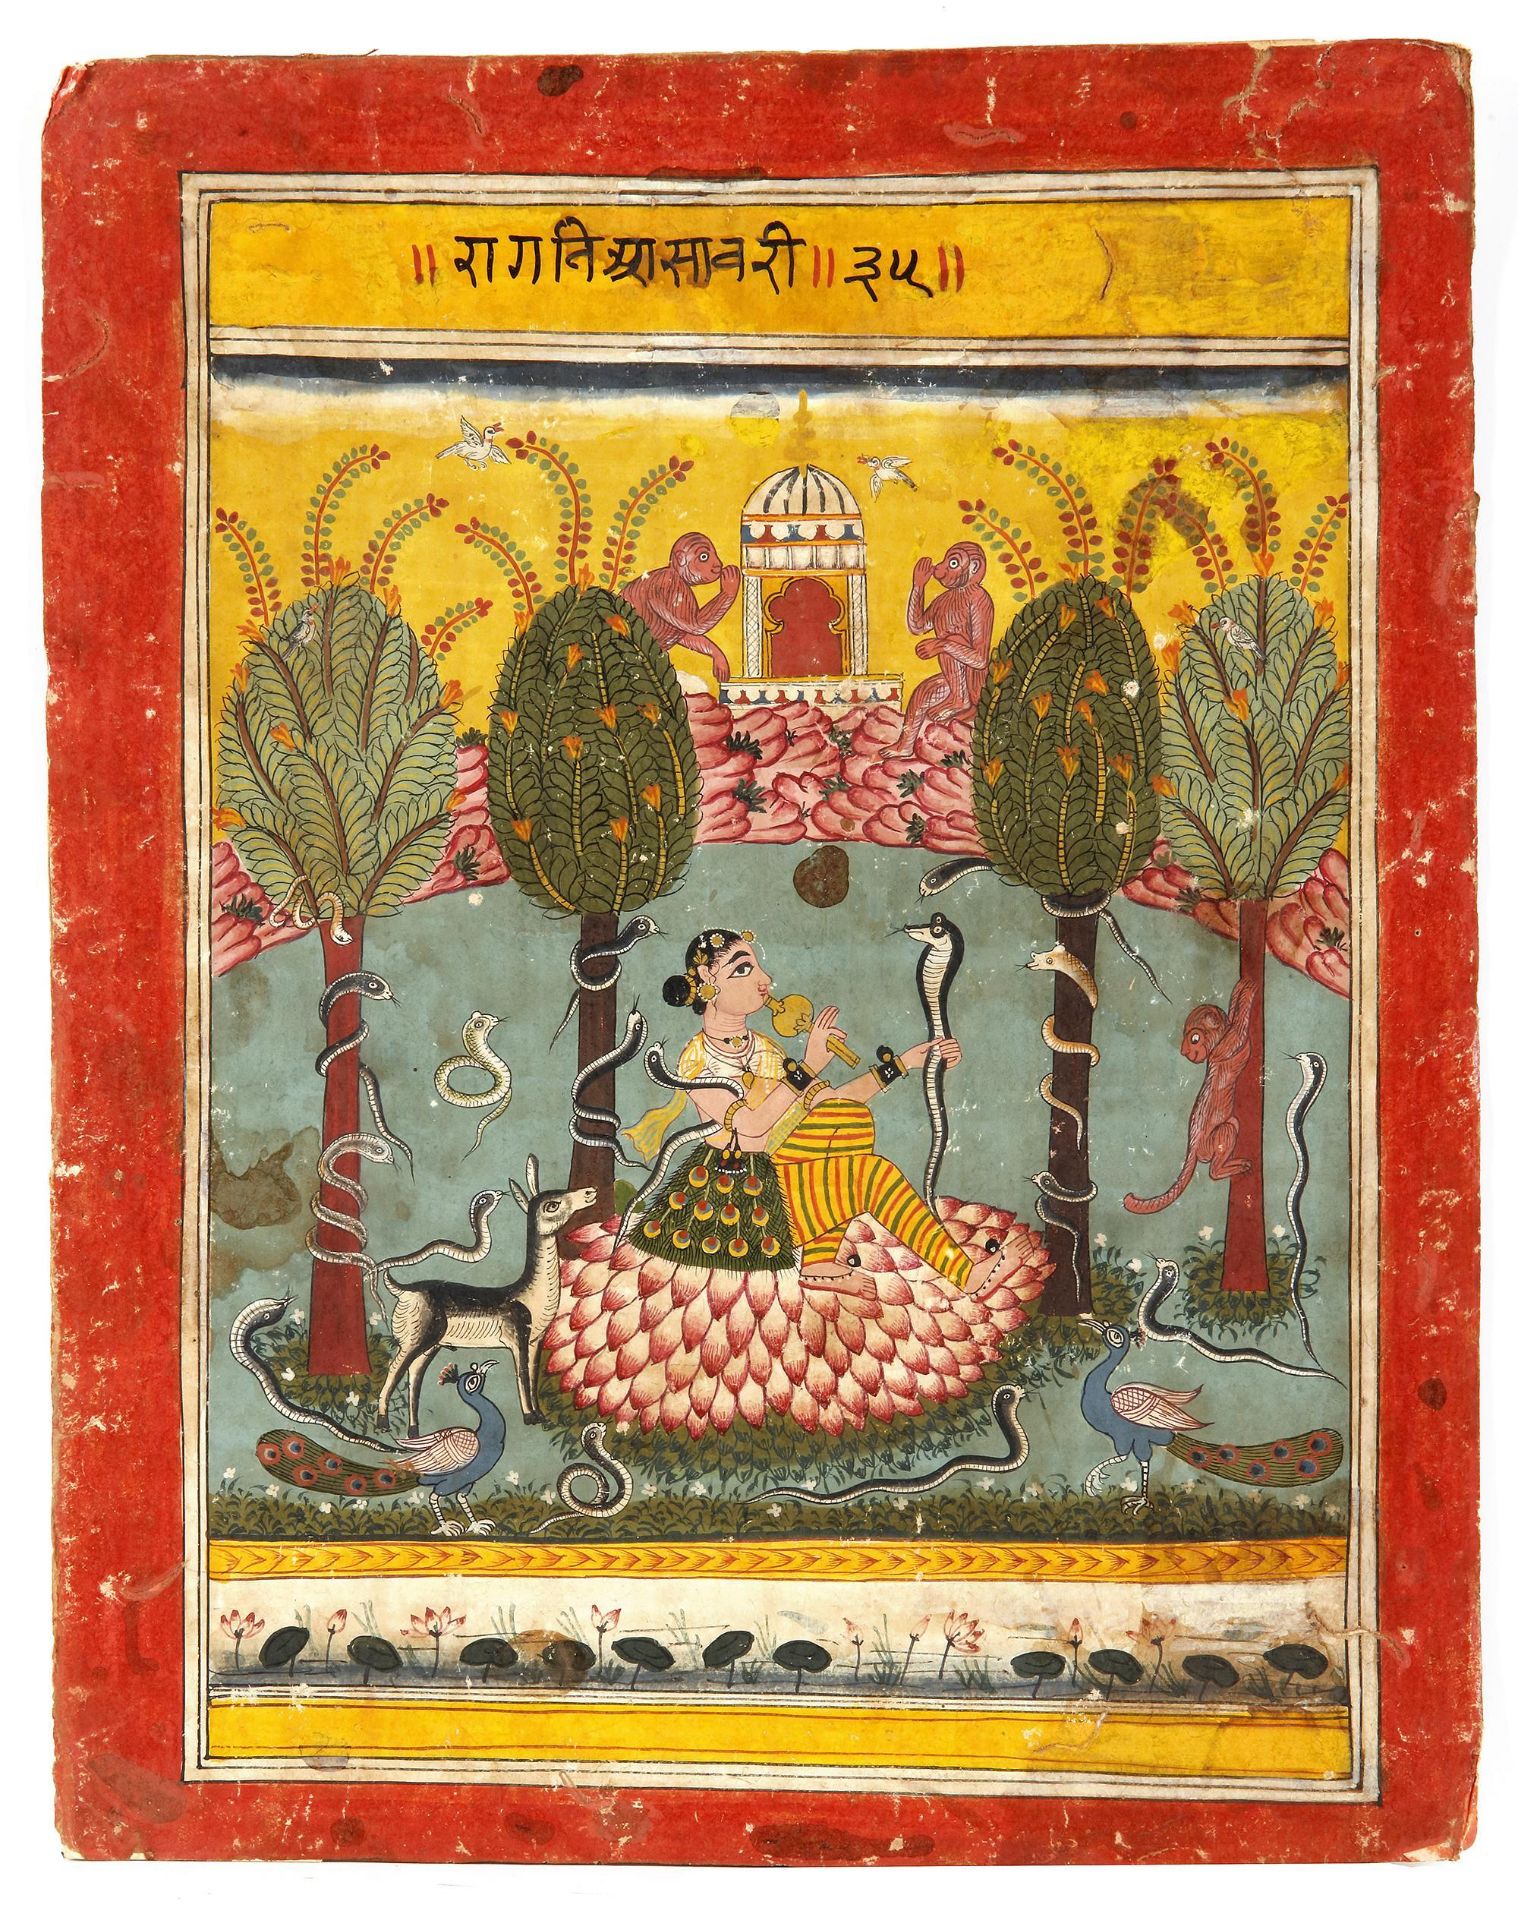 THREE IIIUSTRATIONS FROM A RAGAMALA SERIES, CENTRAL INDIA, MALWA, 17TH CENTURY - Image 4 of 5